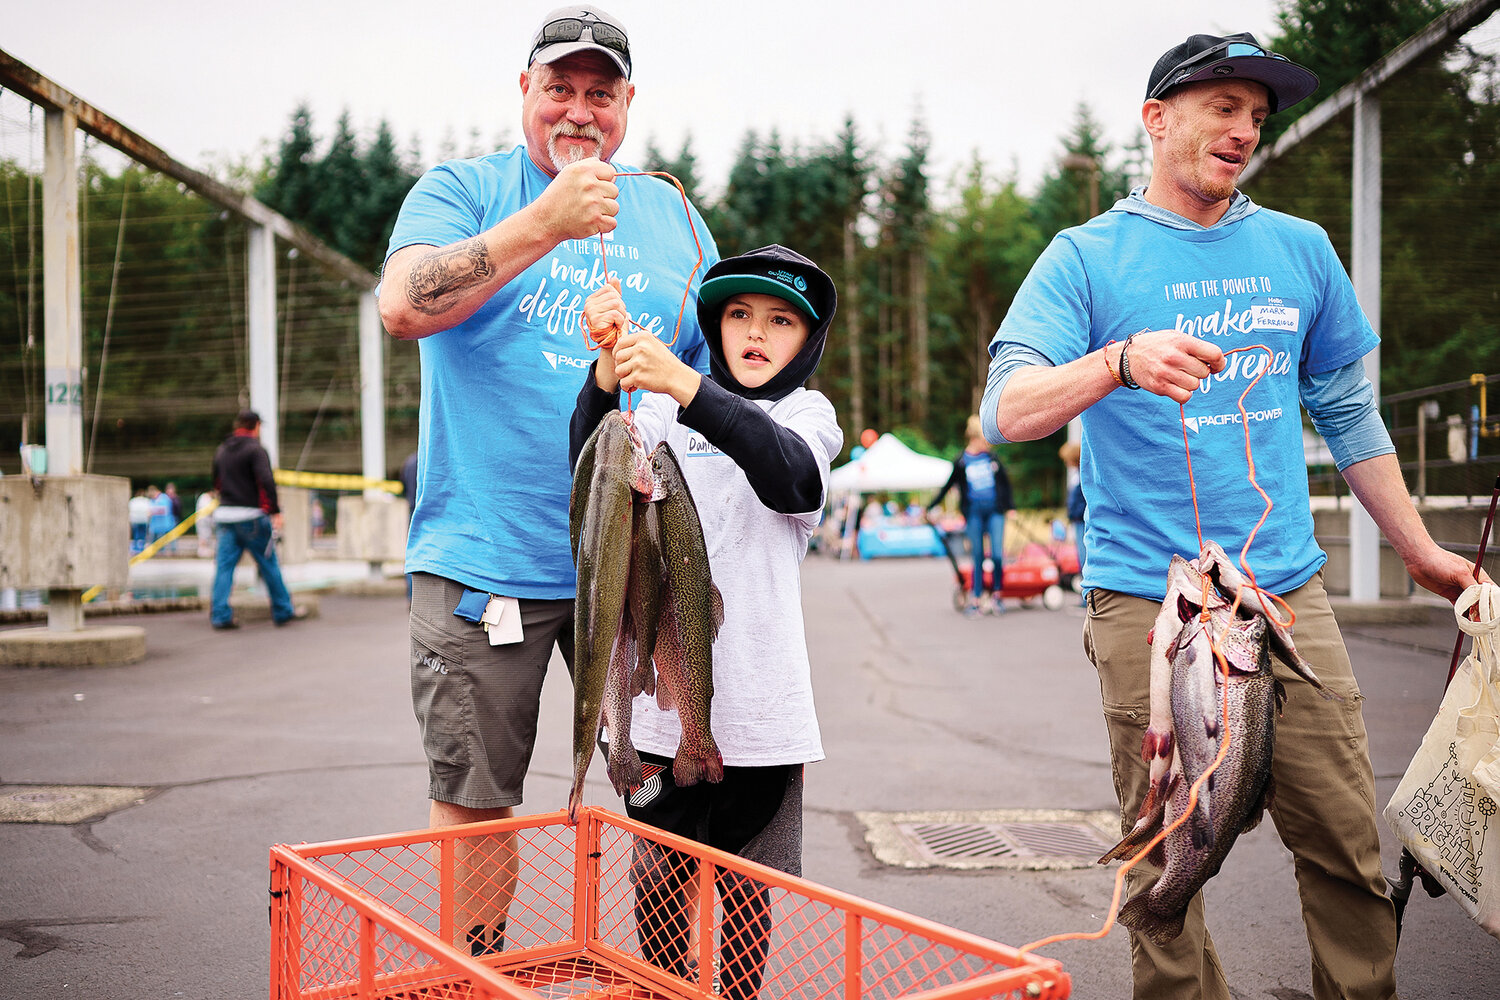 Scenes from the 23rd annual Merwin Special Kids day fishing event held at the Merwin Fish Hatchery on Saturday, July 8.